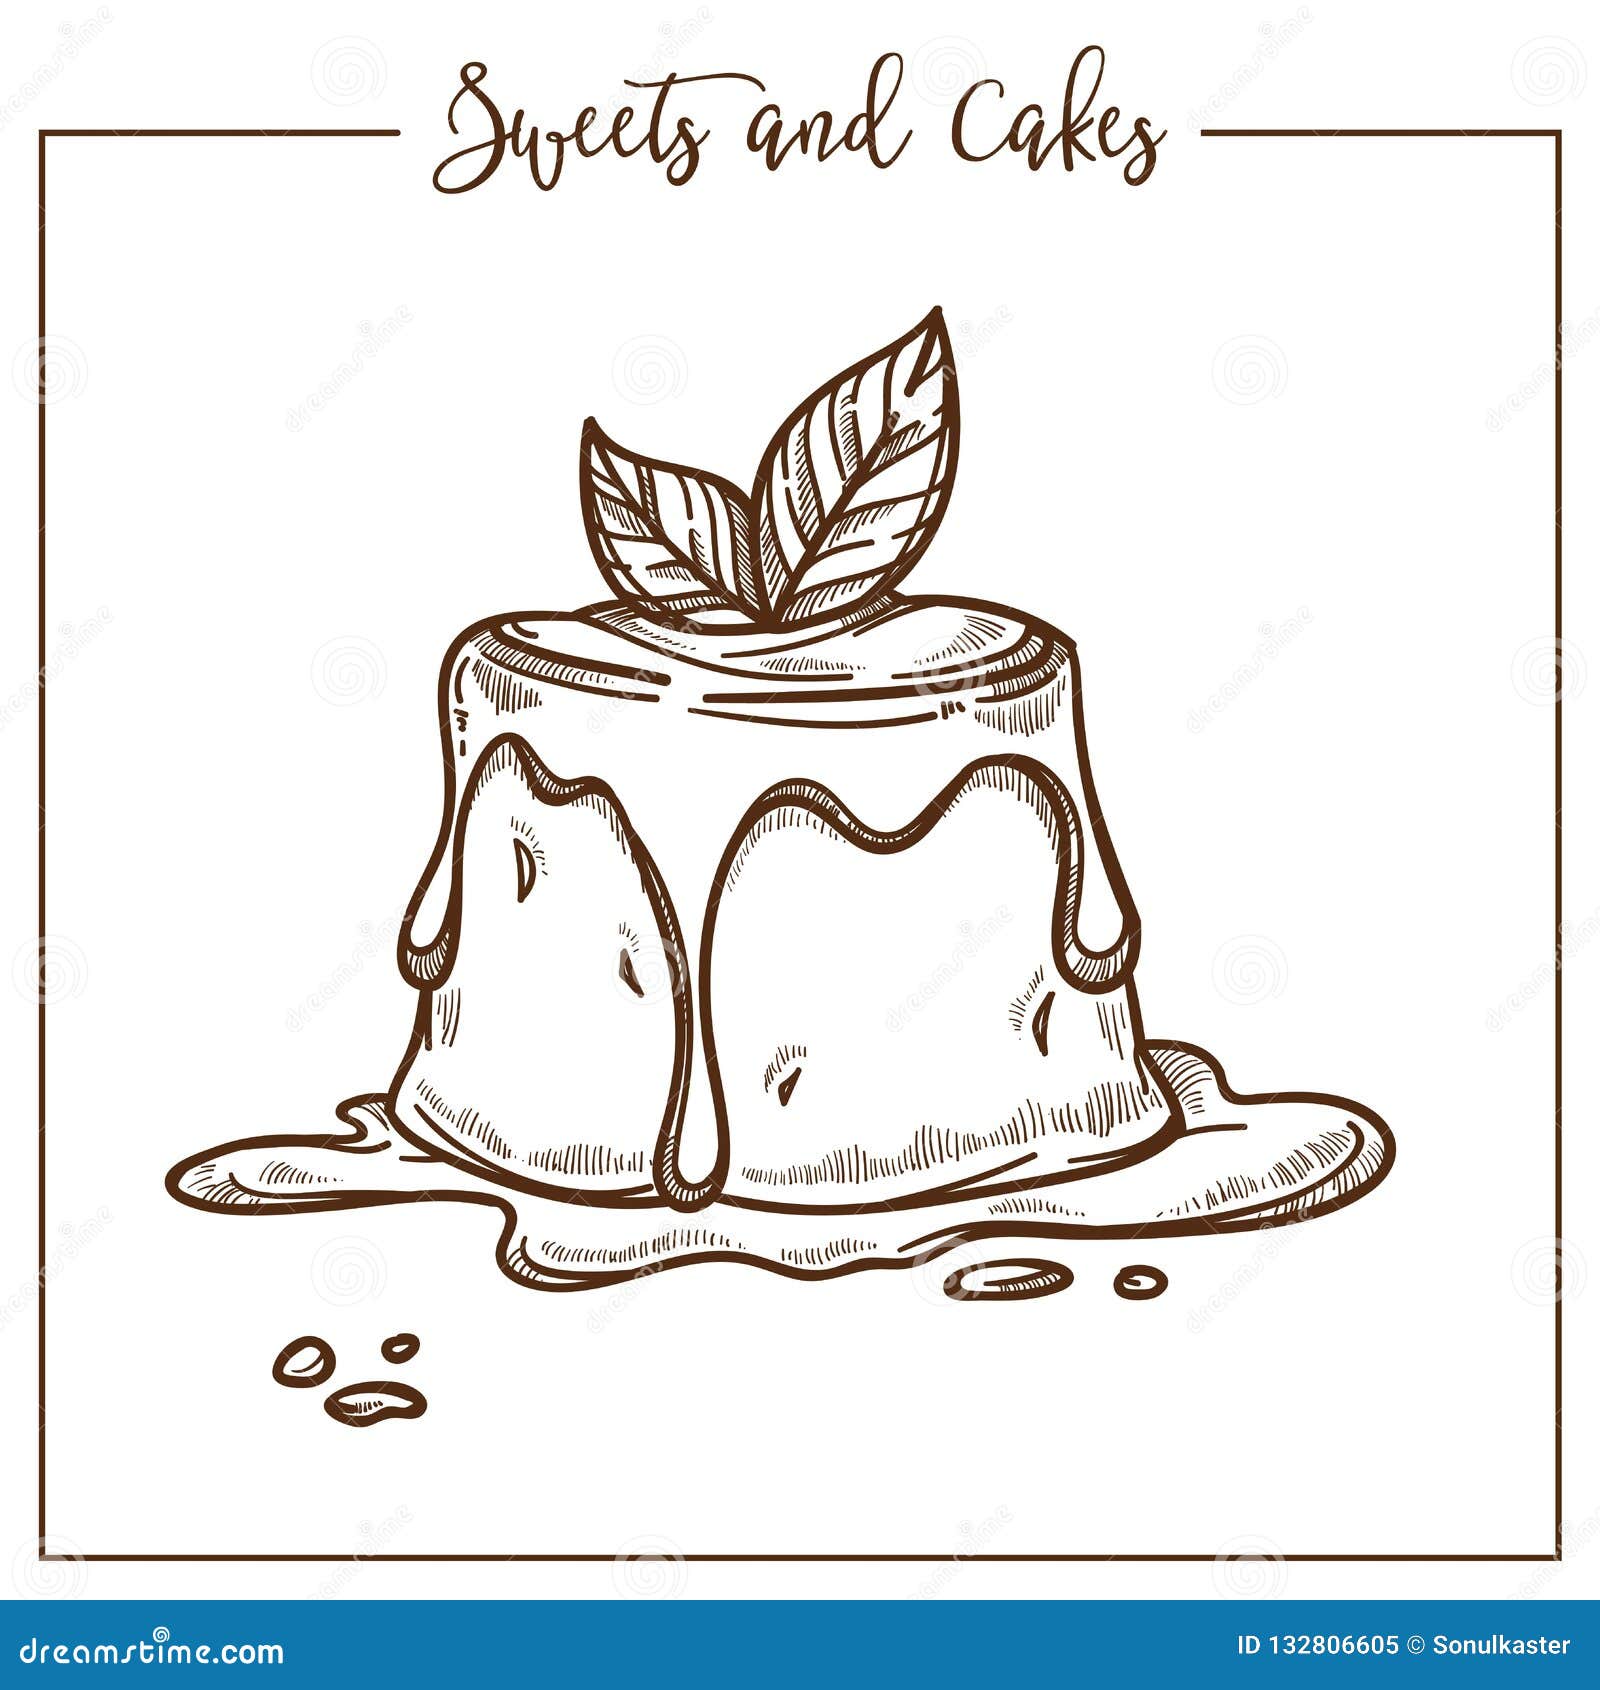 Sweets And Cakes, Dessert Made Of Jelly And Topping Stock Vector